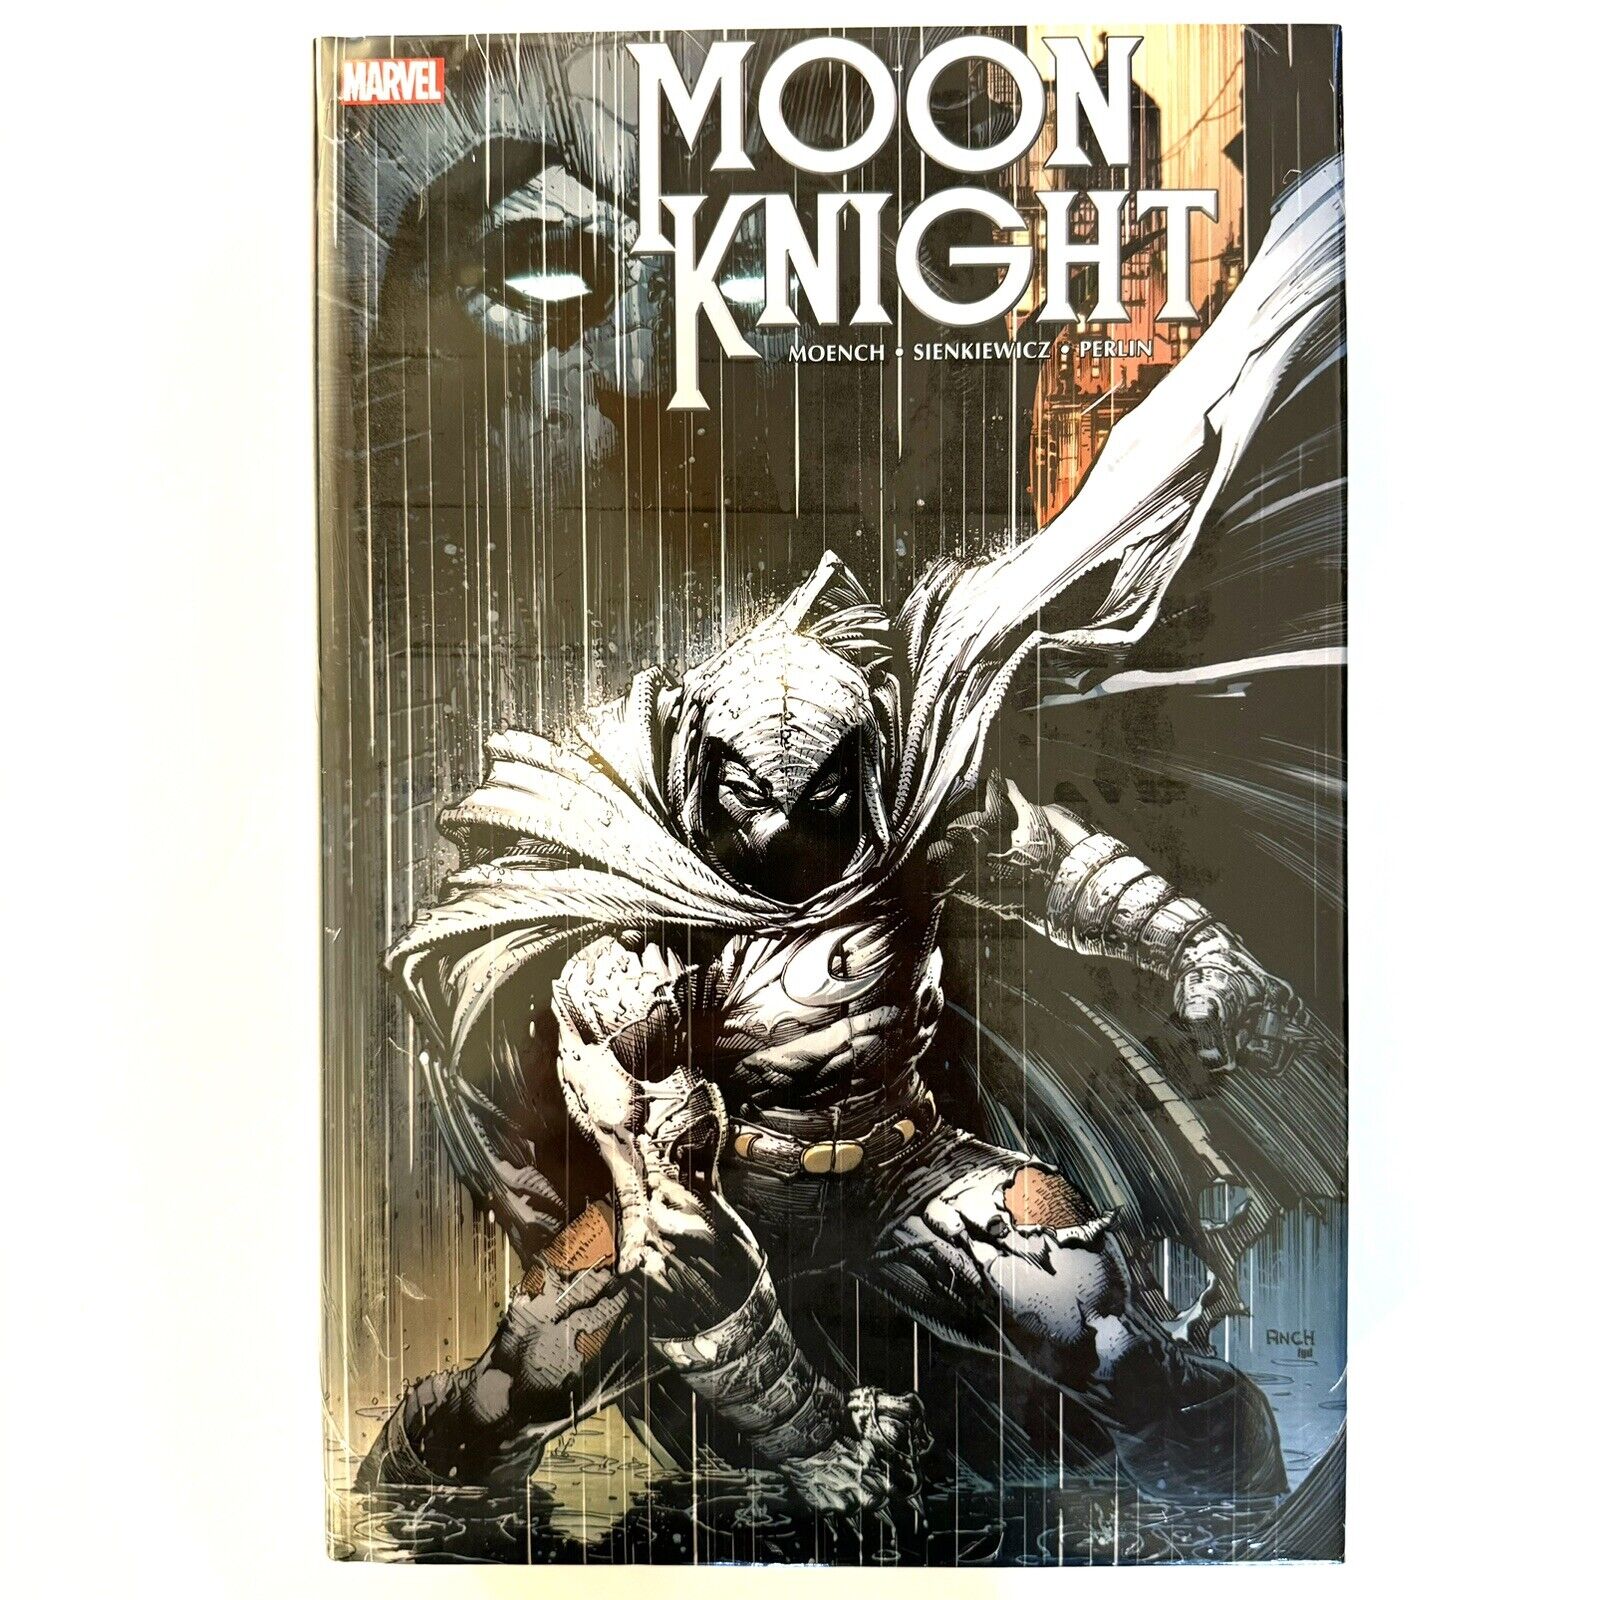 Moon Knight Omnibus Vol 1 New Sealed $5 Flat Combined Shipping